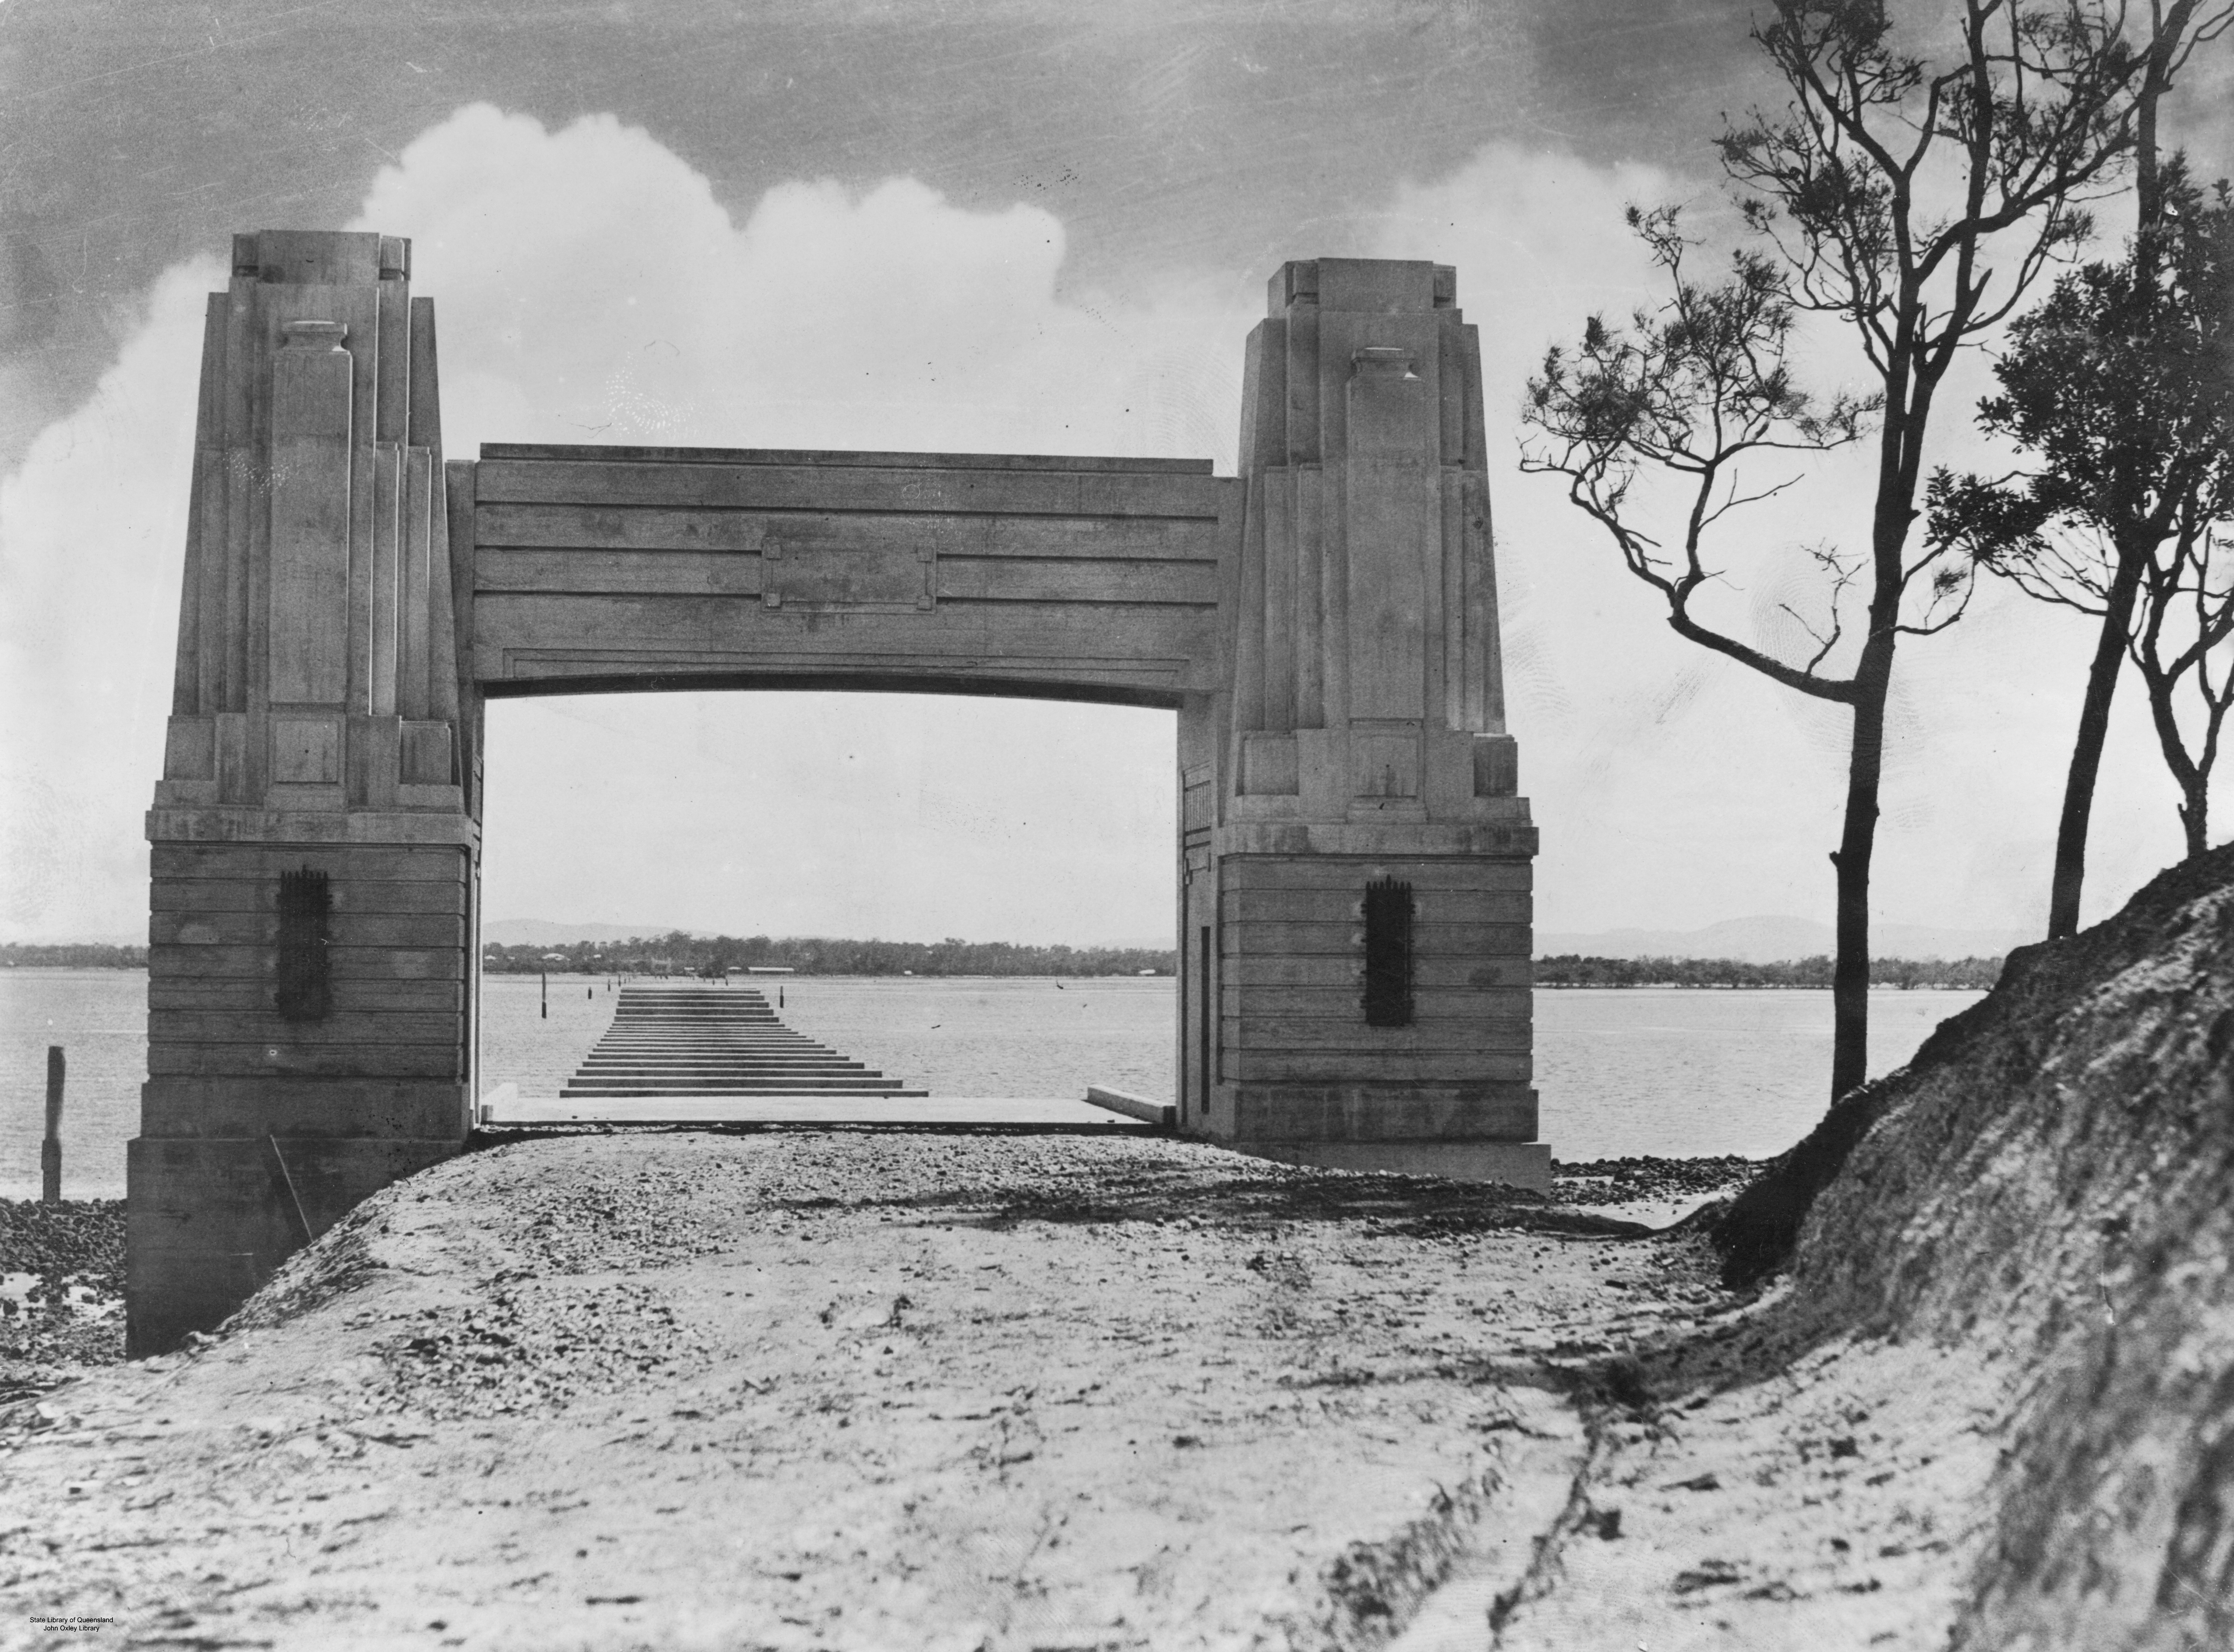 Hornibrook Highway viaduct under construction, Redcliffe, 1935